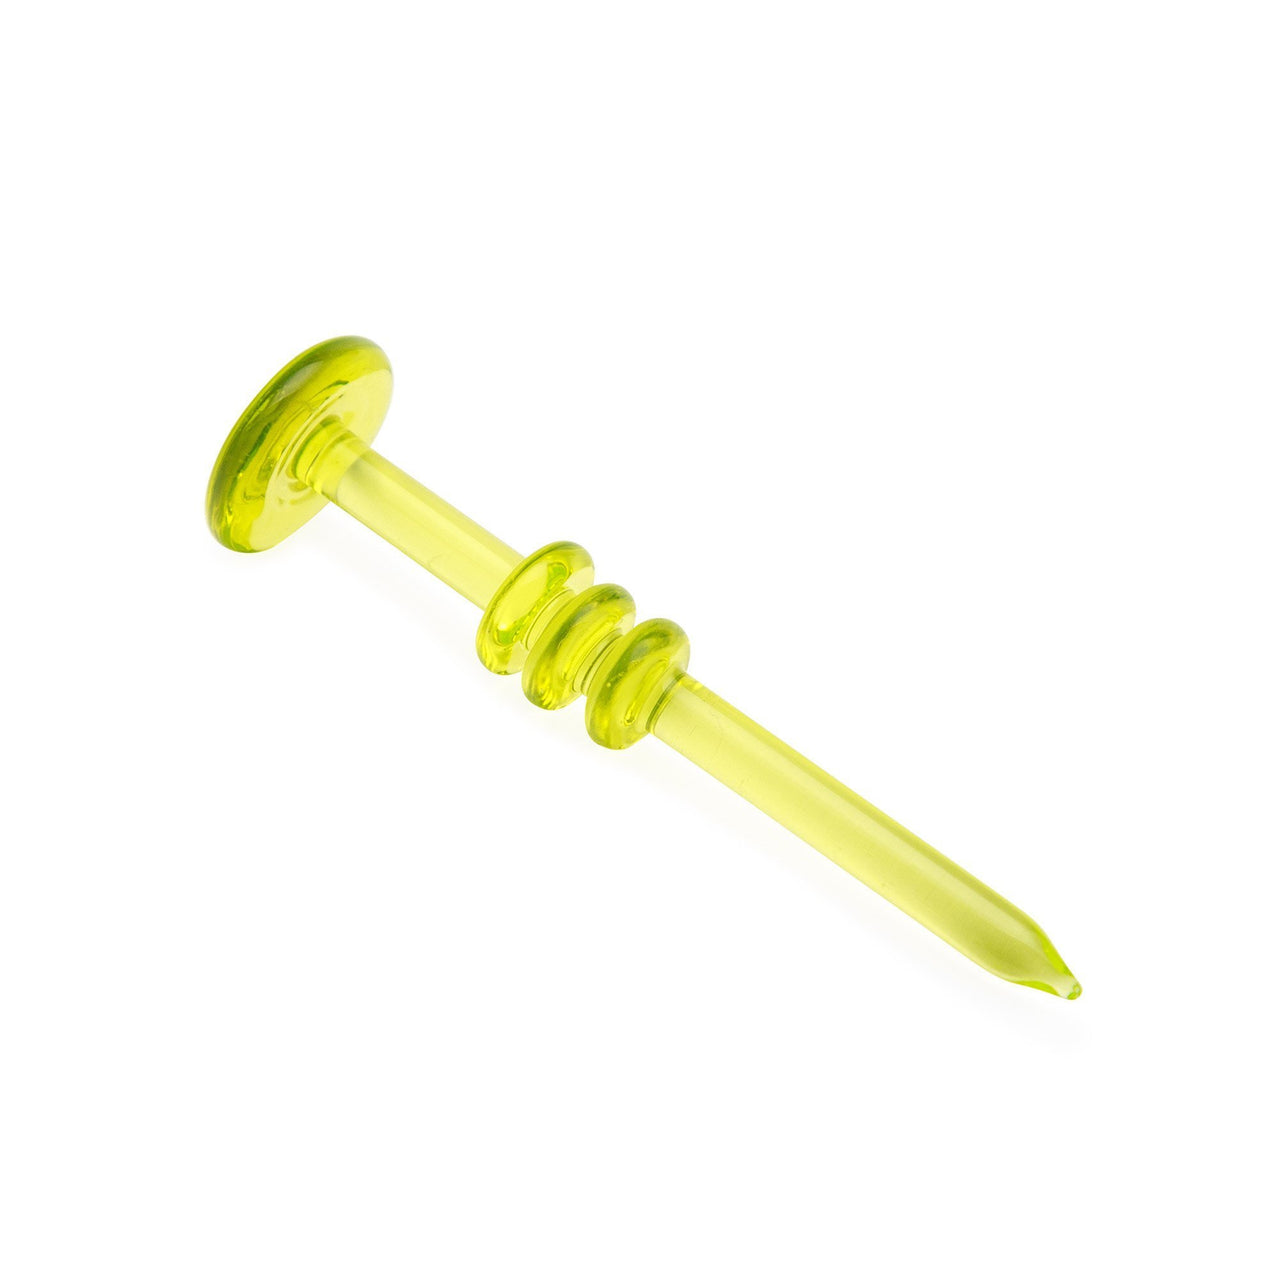 Mathematix Triple Ring Nail Glass Dabber - 420 Science - The most trusted online smoke shop.